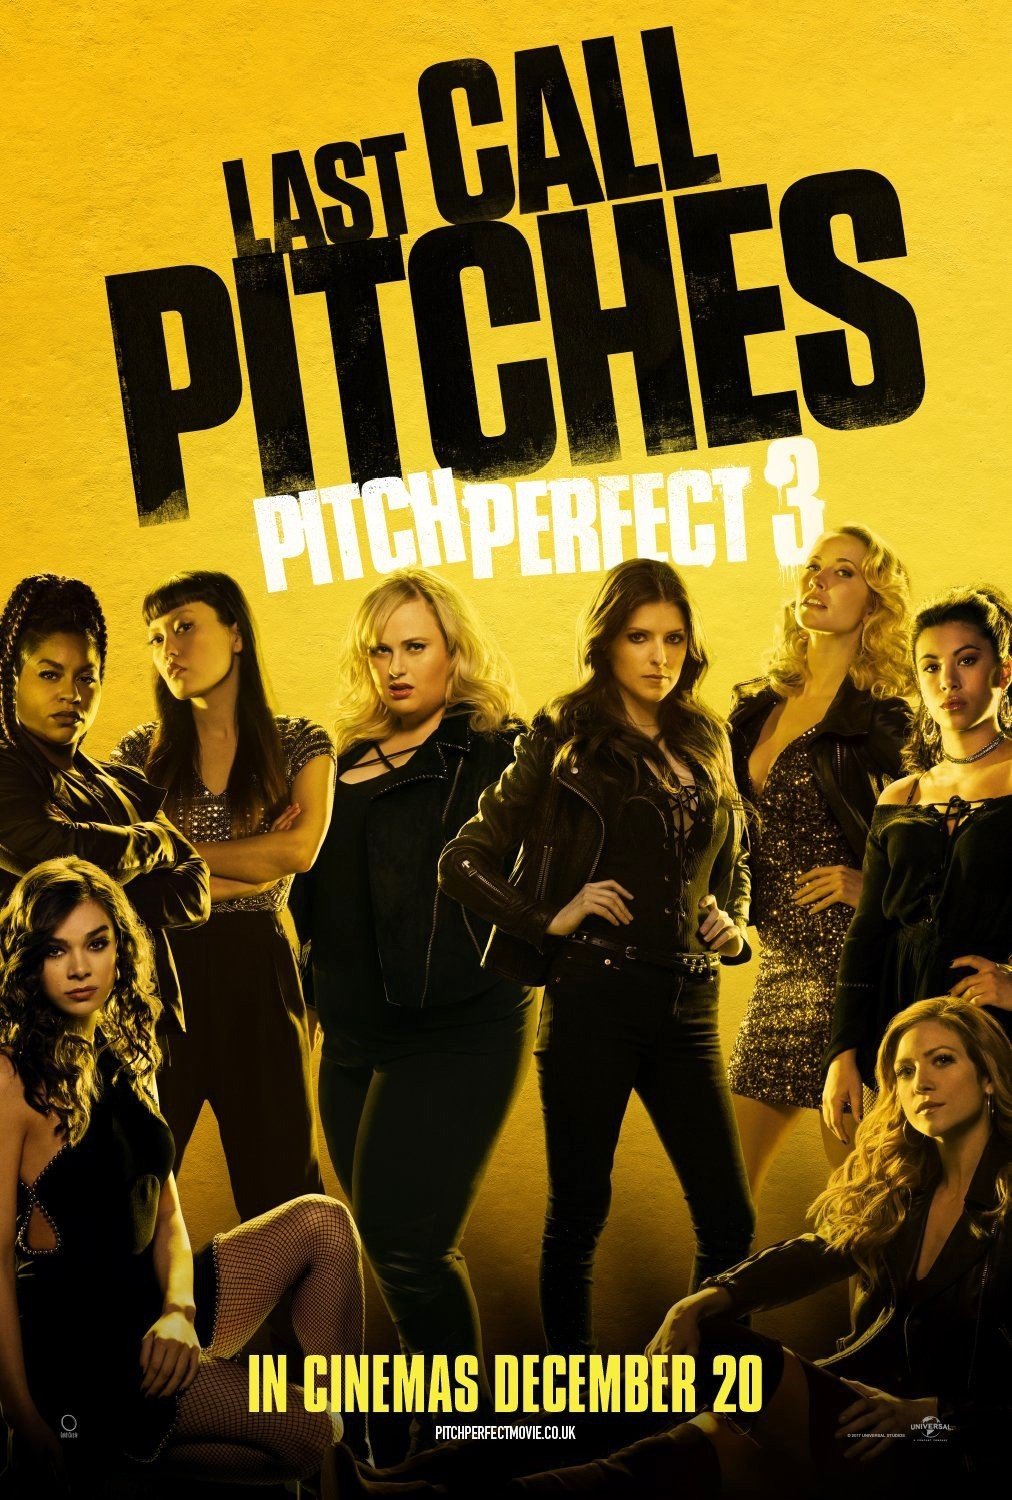 will pitchperfect still be showing jan 27